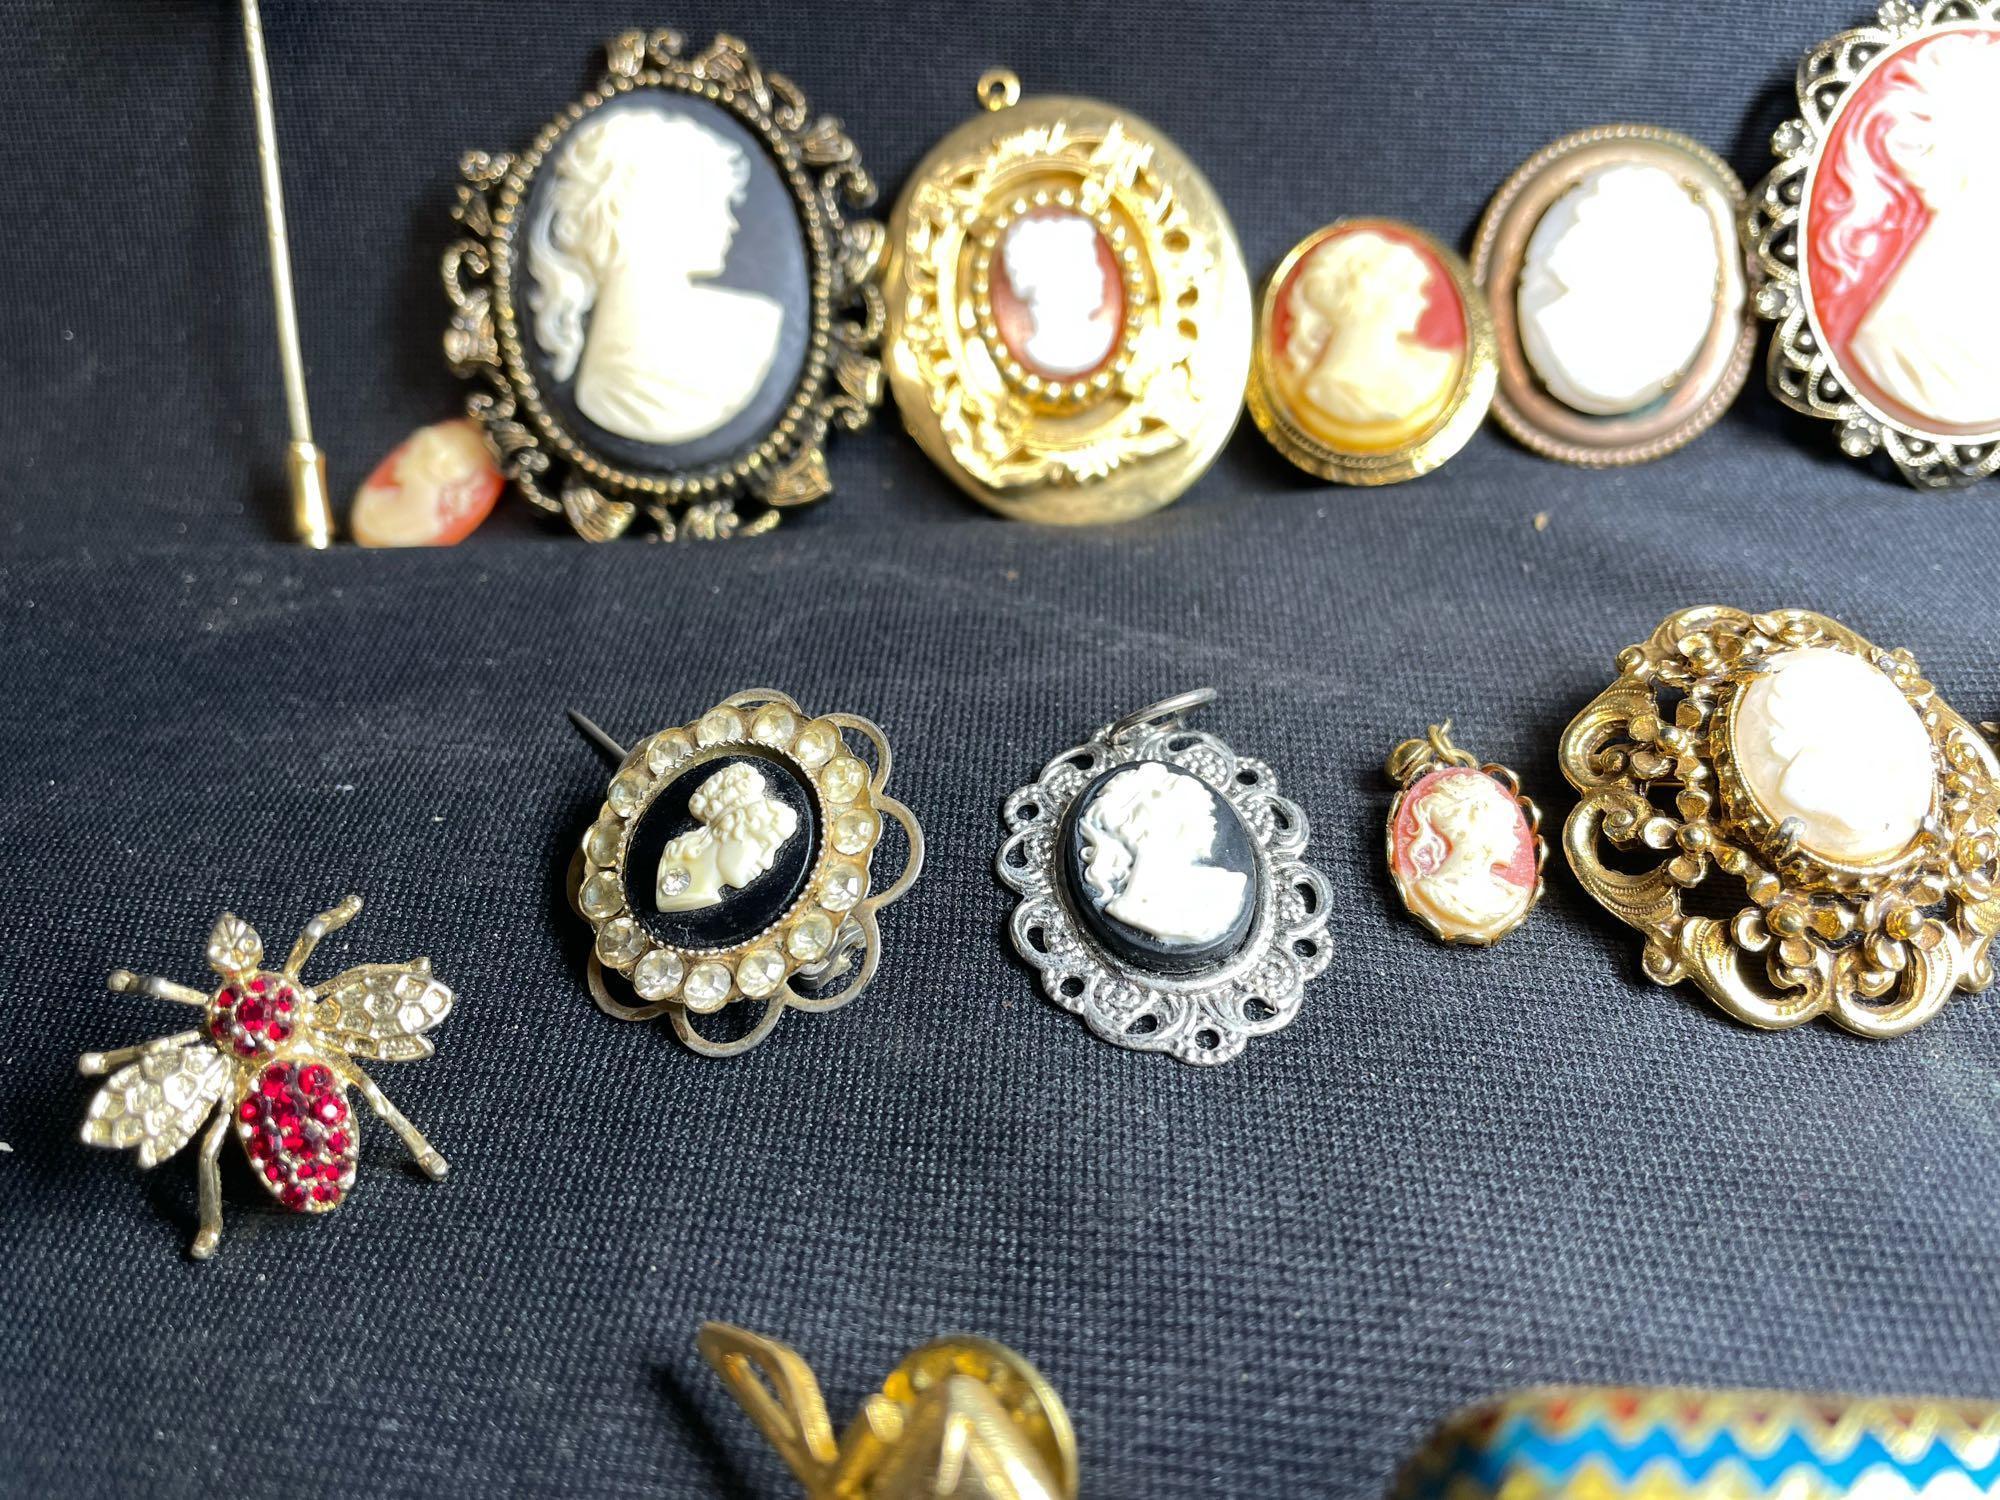 High End Snap On Ear Rings, Vintage Cameos. Chanel, C. Dior, Haskell, Givenchy